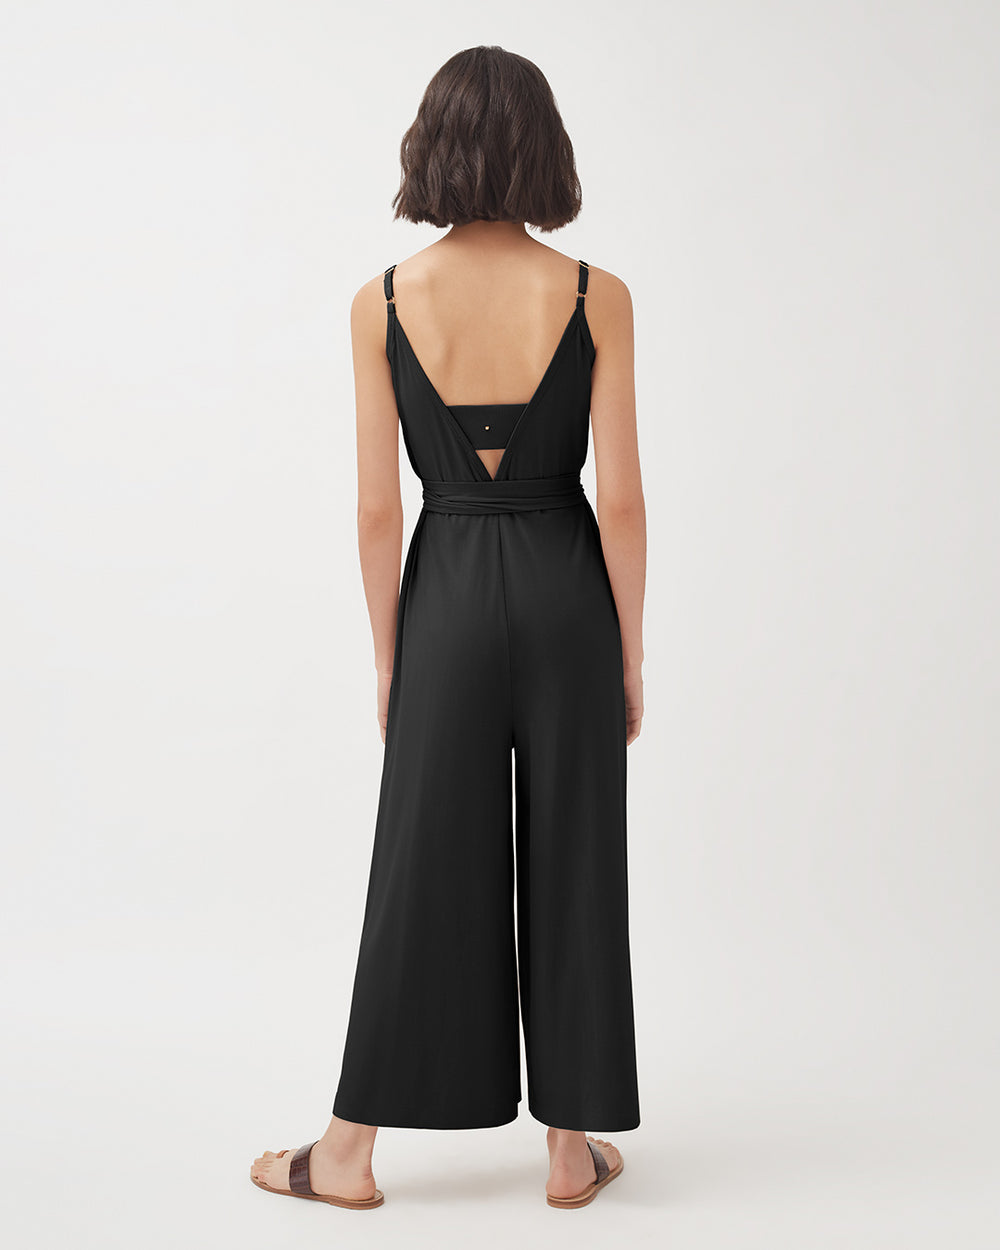 Woman in a jumpsuit standing with her back facing the camera.